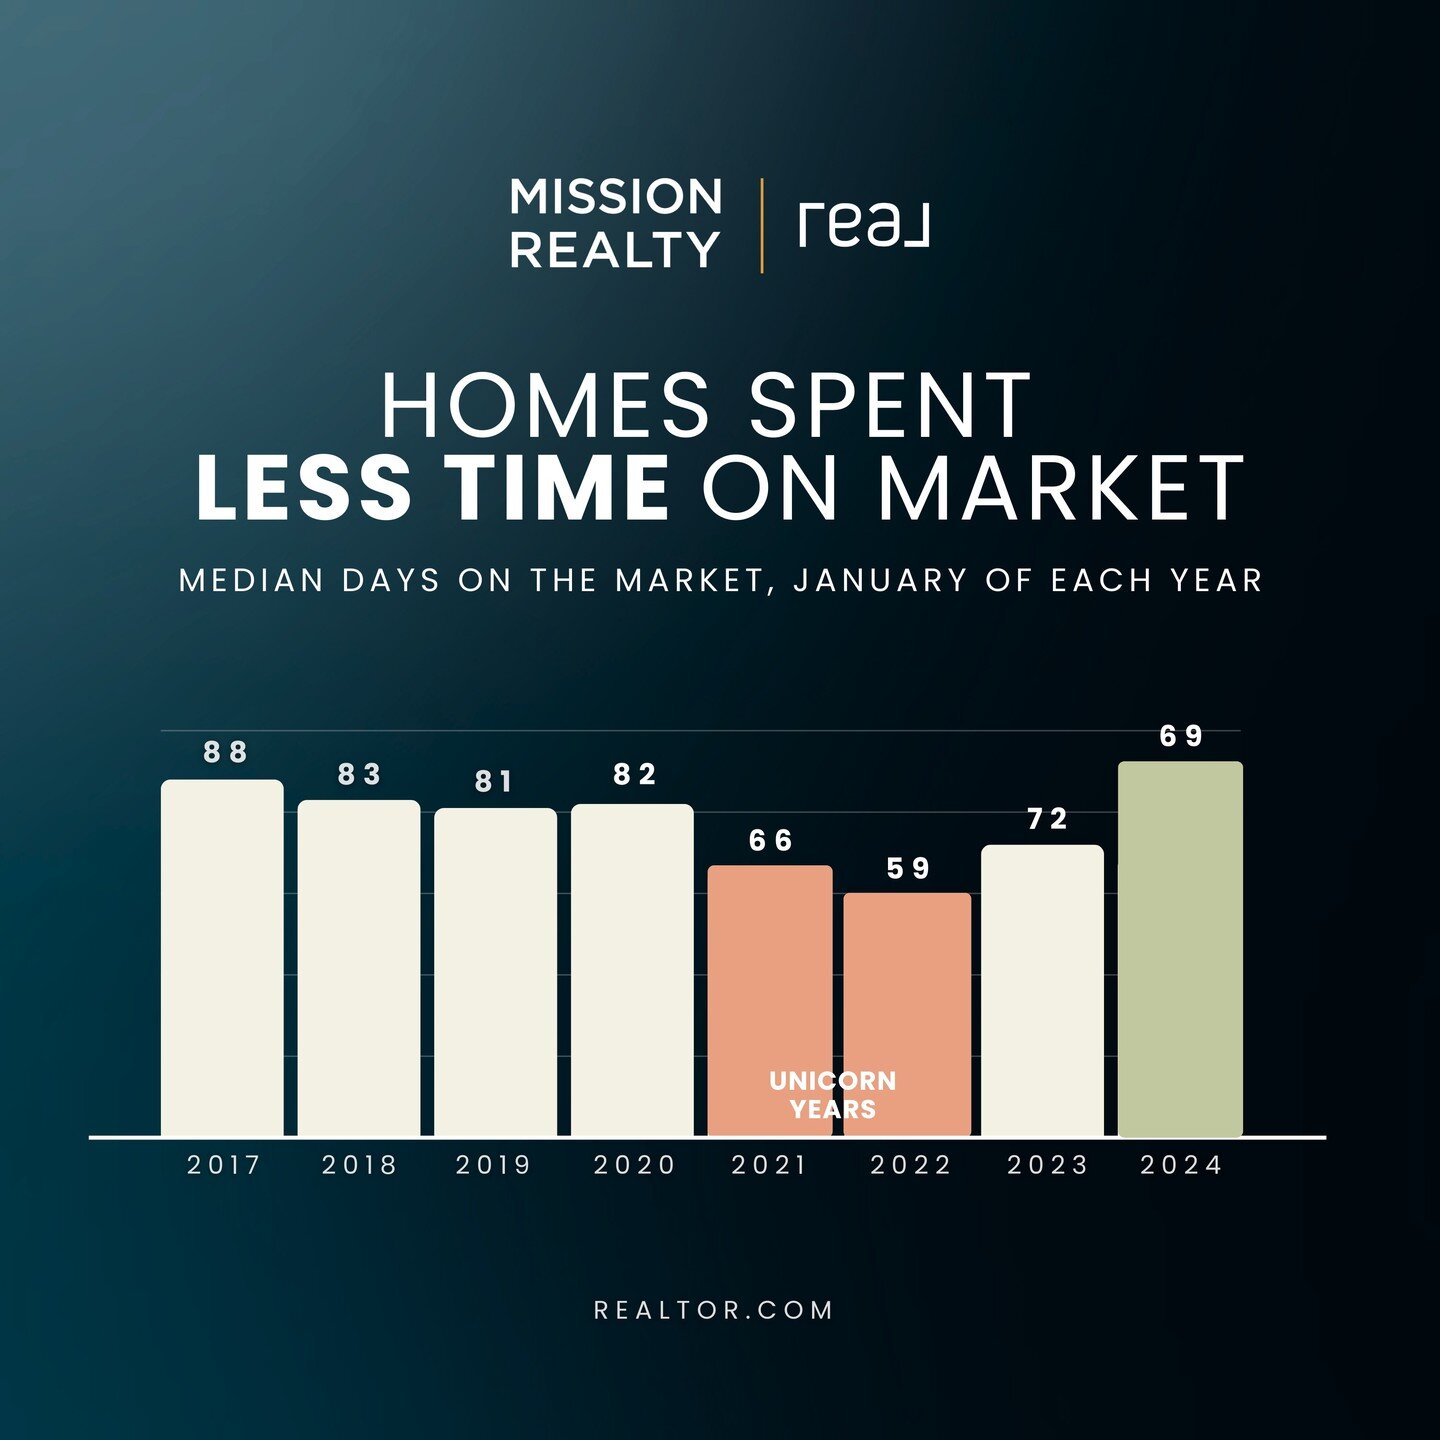 If you&rsquo;re considering moving, here&rsquo;s something you&rsquo;ll want to know. Homes are selling faster than they normally do, largely because there aren&rsquo;t enough for sale. And with a growing number of buyers searching for their next hom